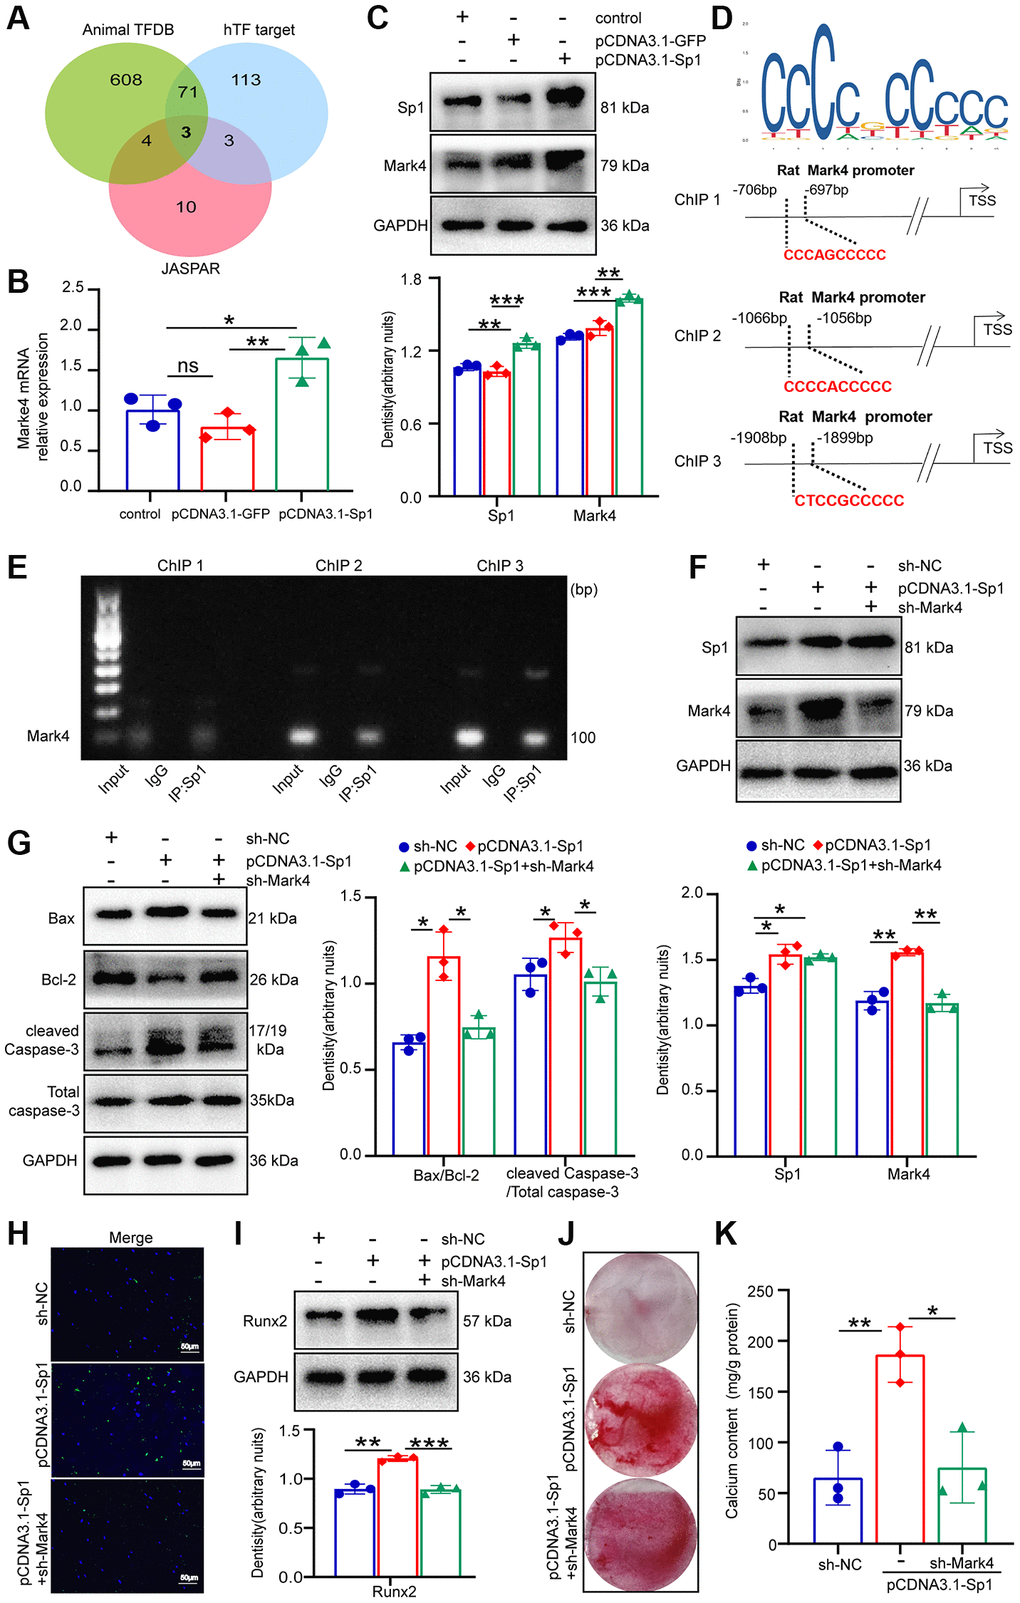 Sp1 participated in β-GP-induced apoptotic protein levels and calcification via promoting Mark4 transcriptional activity in VSMCs. VSMCs were infected with pCDNA3.1-Sp1 or its control pCDNA3.1-GFP and lentiviral shRNA Mark4 (sh-Mark4) or its negative control (sh-NC) under normal medium. (A) Three transcription factors, including Sp1, directly targeting the Mark4 were screened using the online bioinformatics databases Animal TFDB and hTF target, as well as JASPAR. (B) RT–qPCR analysis of Mark4 expression in pCDNA3.1-Sp1 transfected VSMCs. (C) Western blot and quantitative densitometry analysis of Sp1 and Mark4 in VSMCs with pCDNA3.1-Sp1. *Means p **p ***p *p **p ***p D) The putative Sp1 binding site and sequences in Mark4 promoter were shown. (E) ChIP assay verified that Sp1 was enriched at the Mark4 promoter region. (F, G) Western blot and quantitative densitometry analysis of Sp1, Mark4 and apoptosis-related proteins in VSMCs with pCDNA3.1-Sp1 and sh-Mark4. (H) Apoptosis of VSMCs with pCDNA3.1-Sp1 and sh-Mark4 was assessed by TUNEL staining. (I) Western blot and quantitative densitometry analysis of Runx2, (J) Alizarin Red S staining and (K) calcium content assessed calcification in VSMCs with pCDNA3.1-Sp1 and sh-Mark4. *Means p **p ***p *p **p ***p 